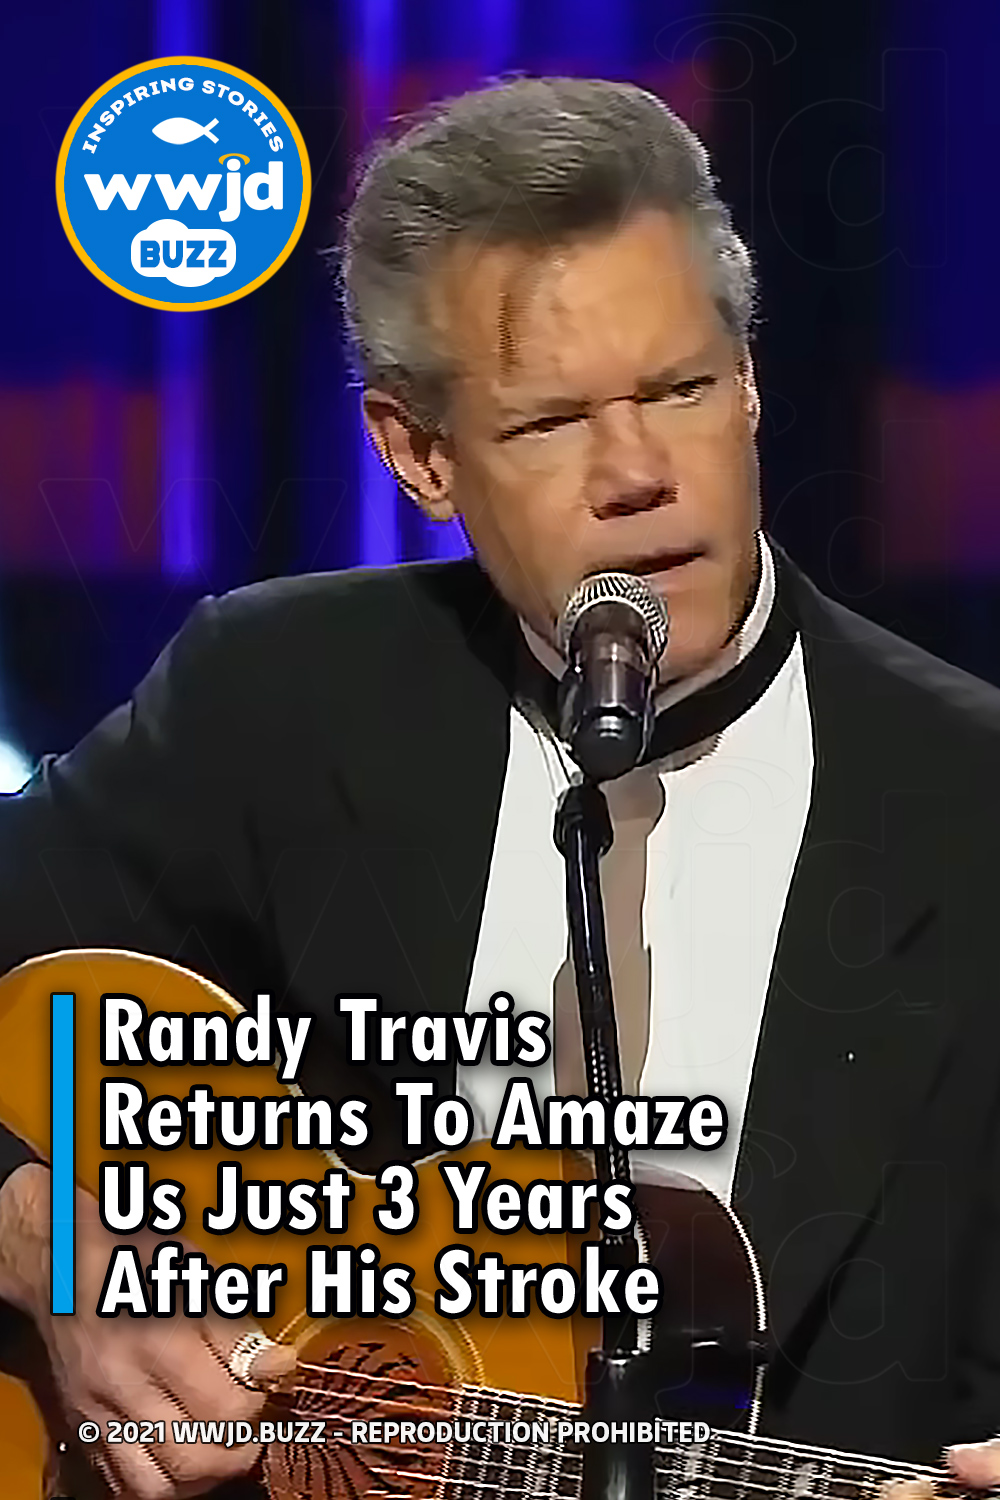 Randy Travis Returns To Amaze Us Just 3 Years After His Stroke